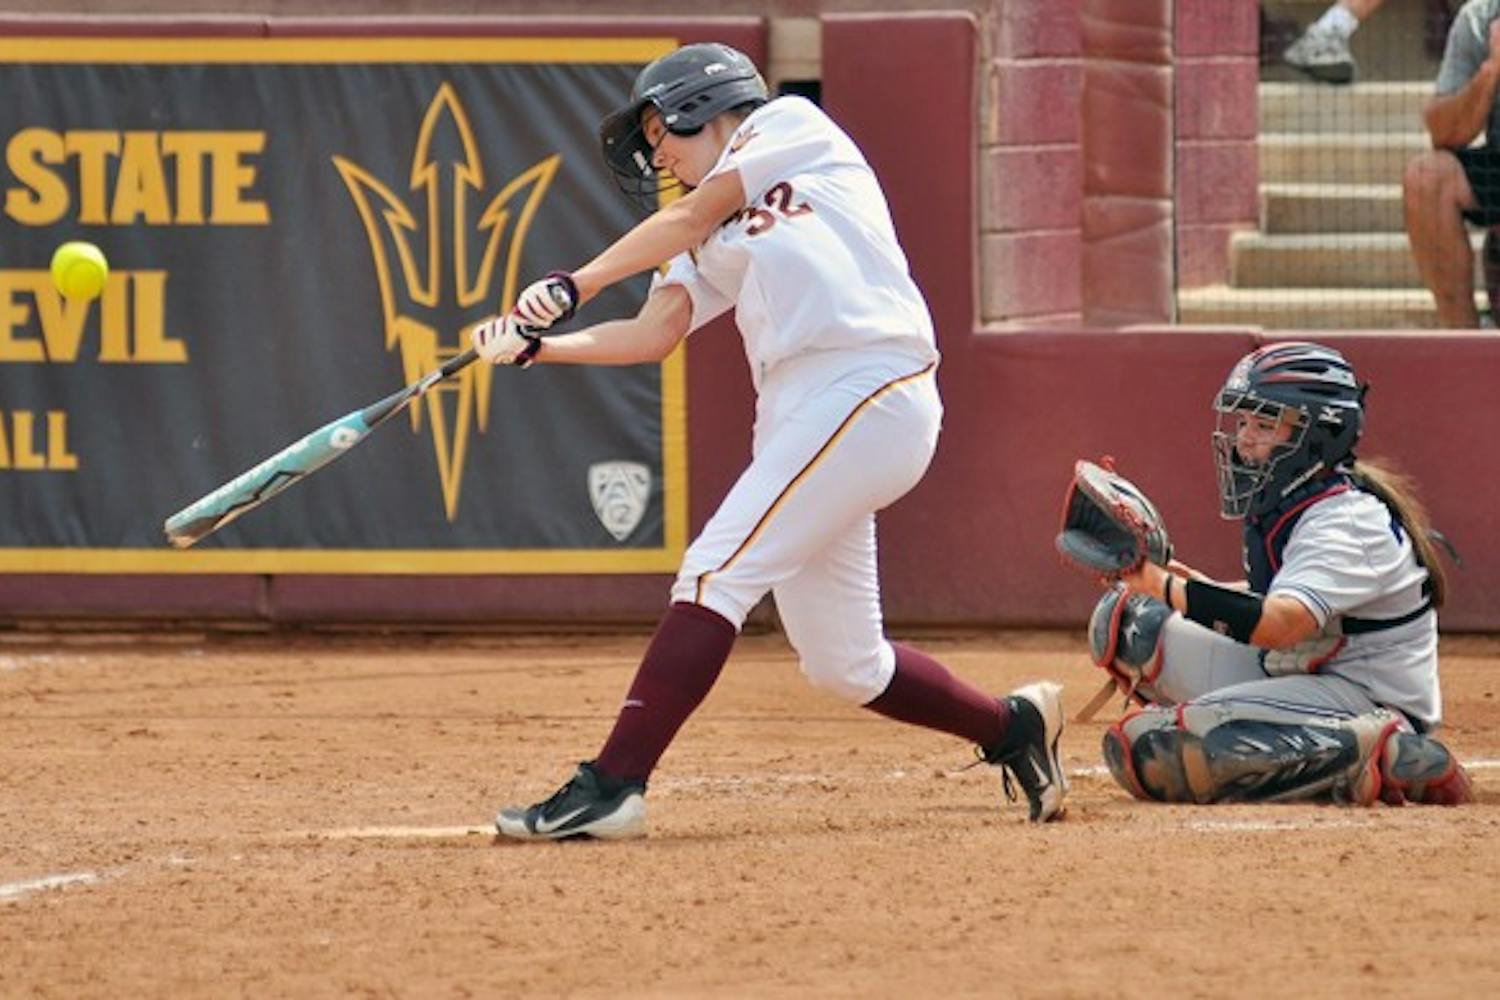 Haley Steele hits a grand slam in a game against UA on March 25. Steele's grand slam highlighted ASU's comeback victory. (Photo by Aaron Lavinsky)